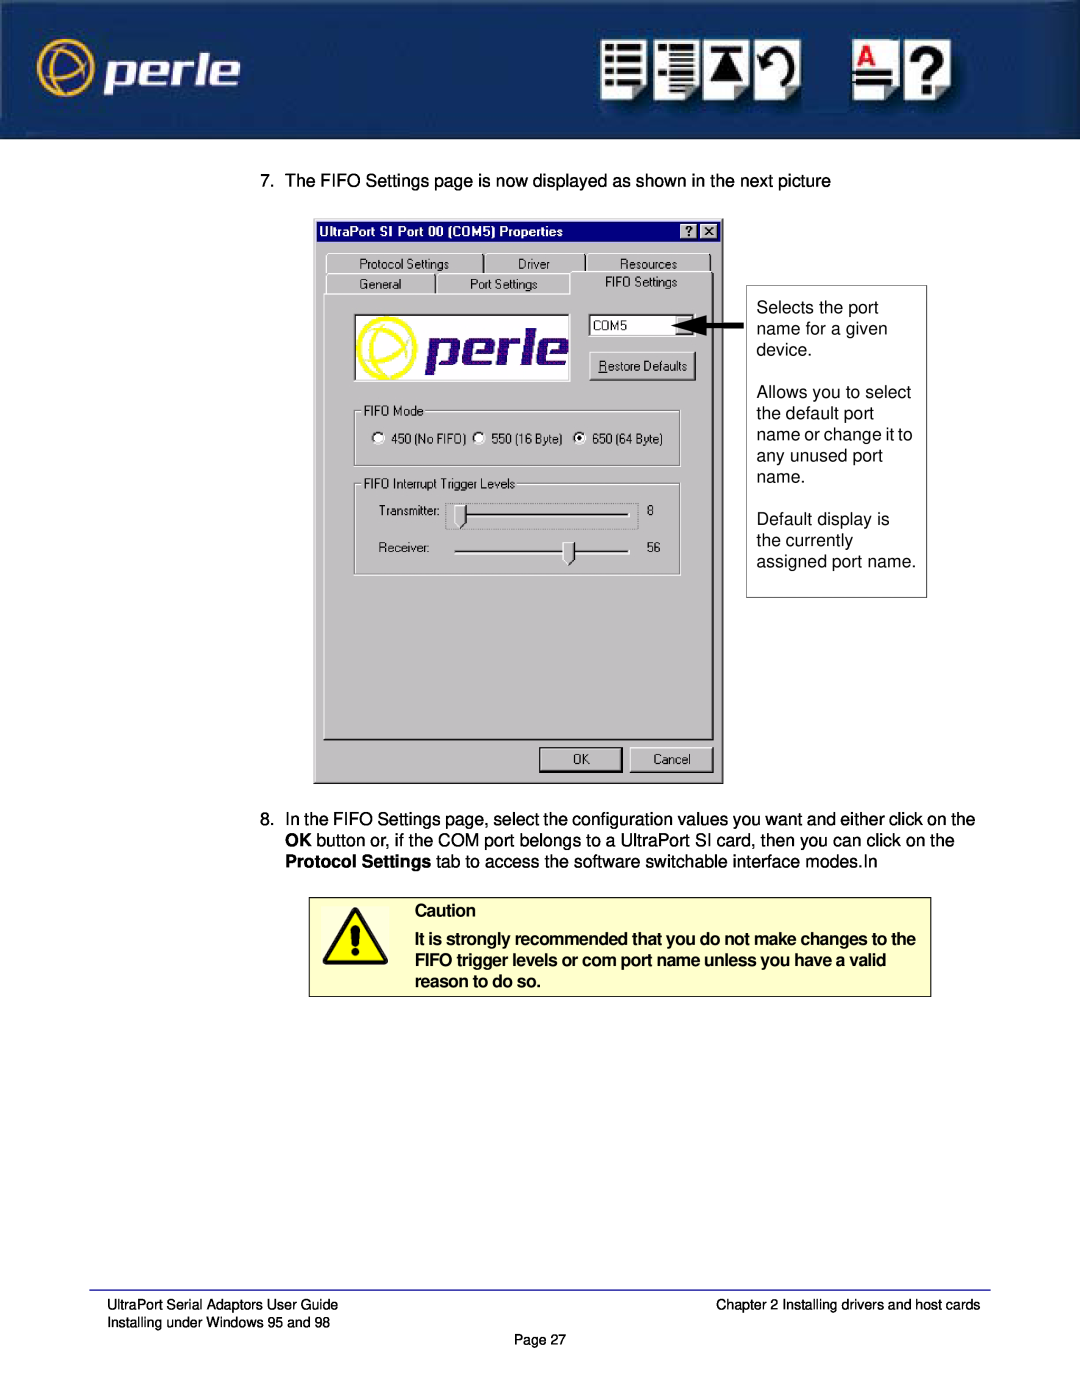 Perle Systems 5500152-23 manual Selects the port name for a given device 